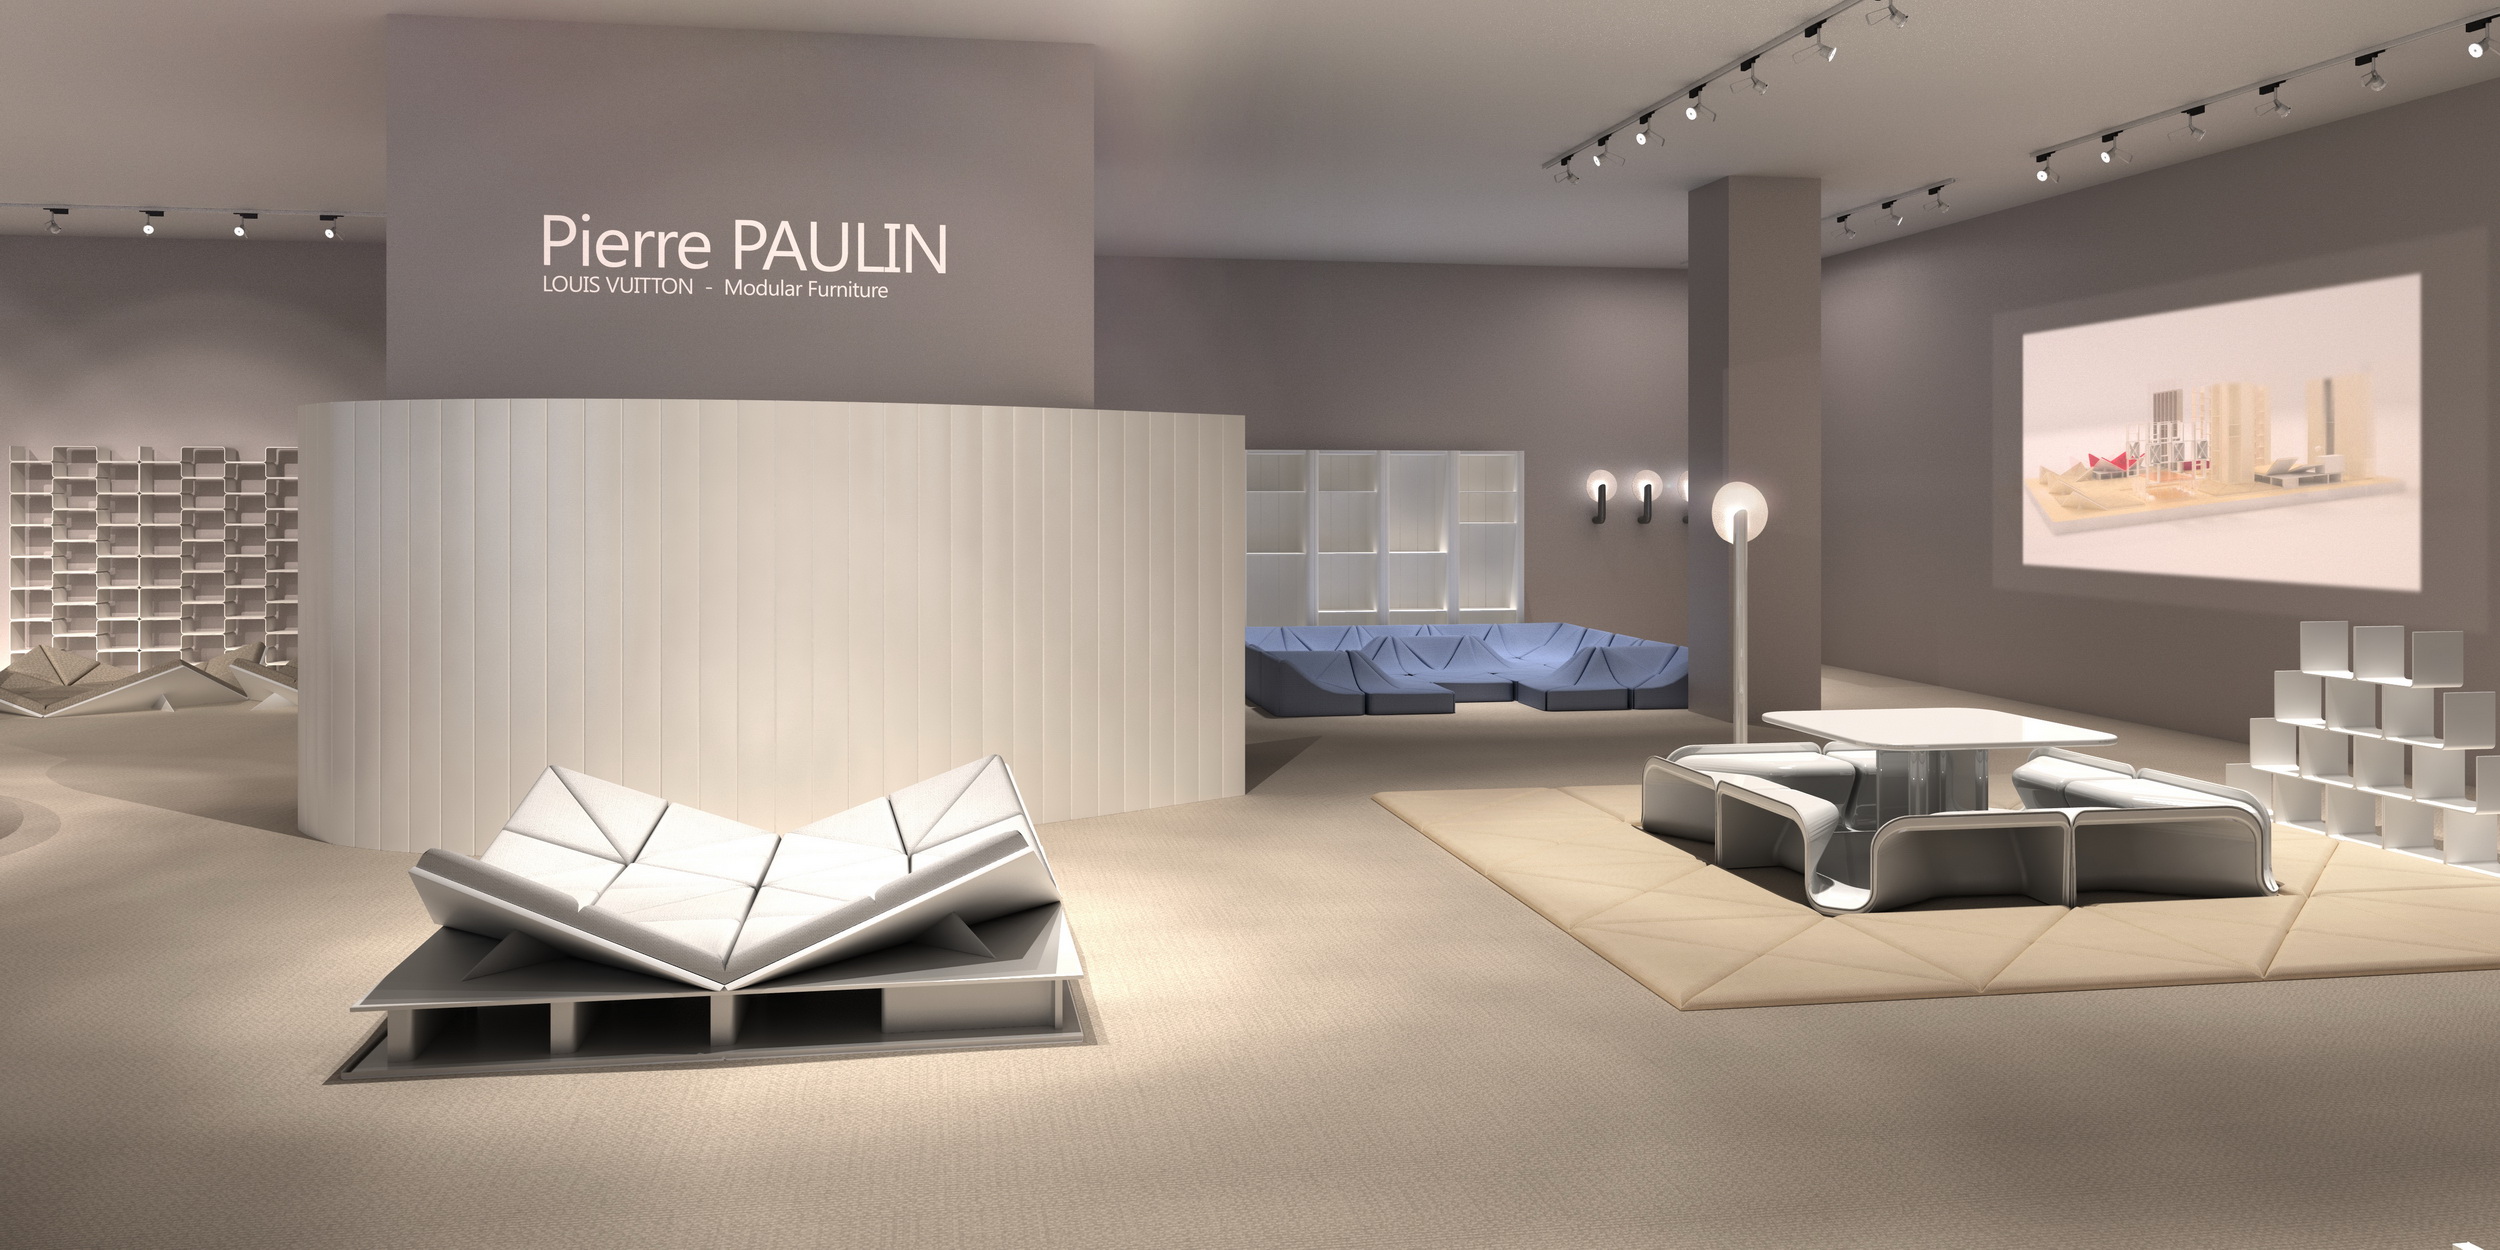 Pierre Paulin Project - Louis Vuitton - Maquette and renderings by